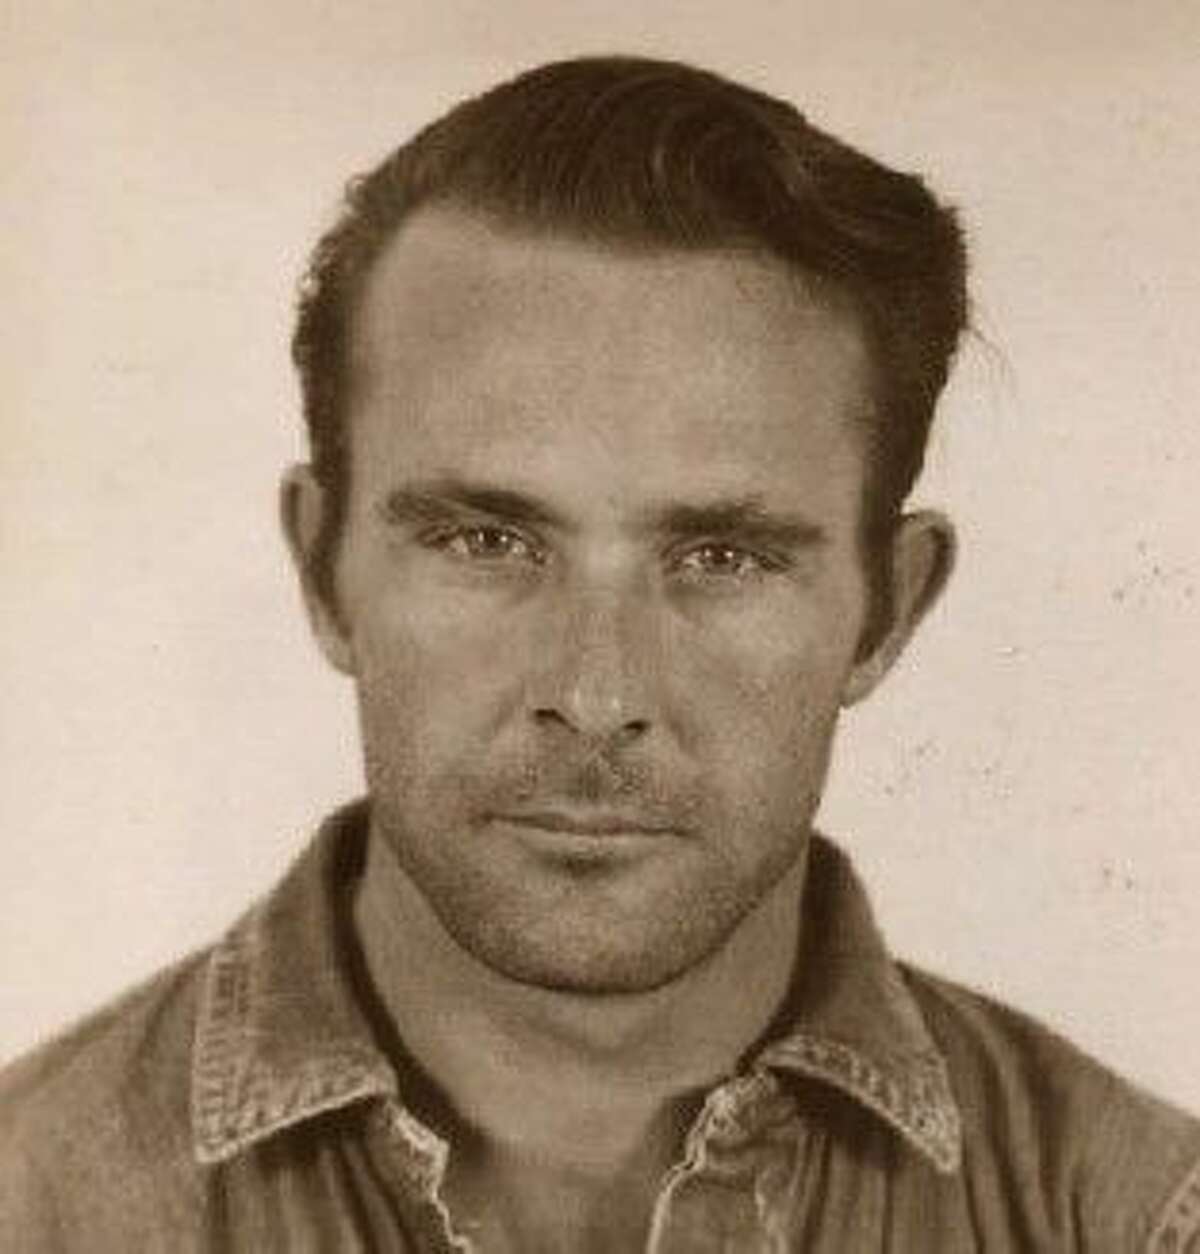 Clarence Anglin: Wanted by U.S. Marshals for his escape from Alcatraz in 1962